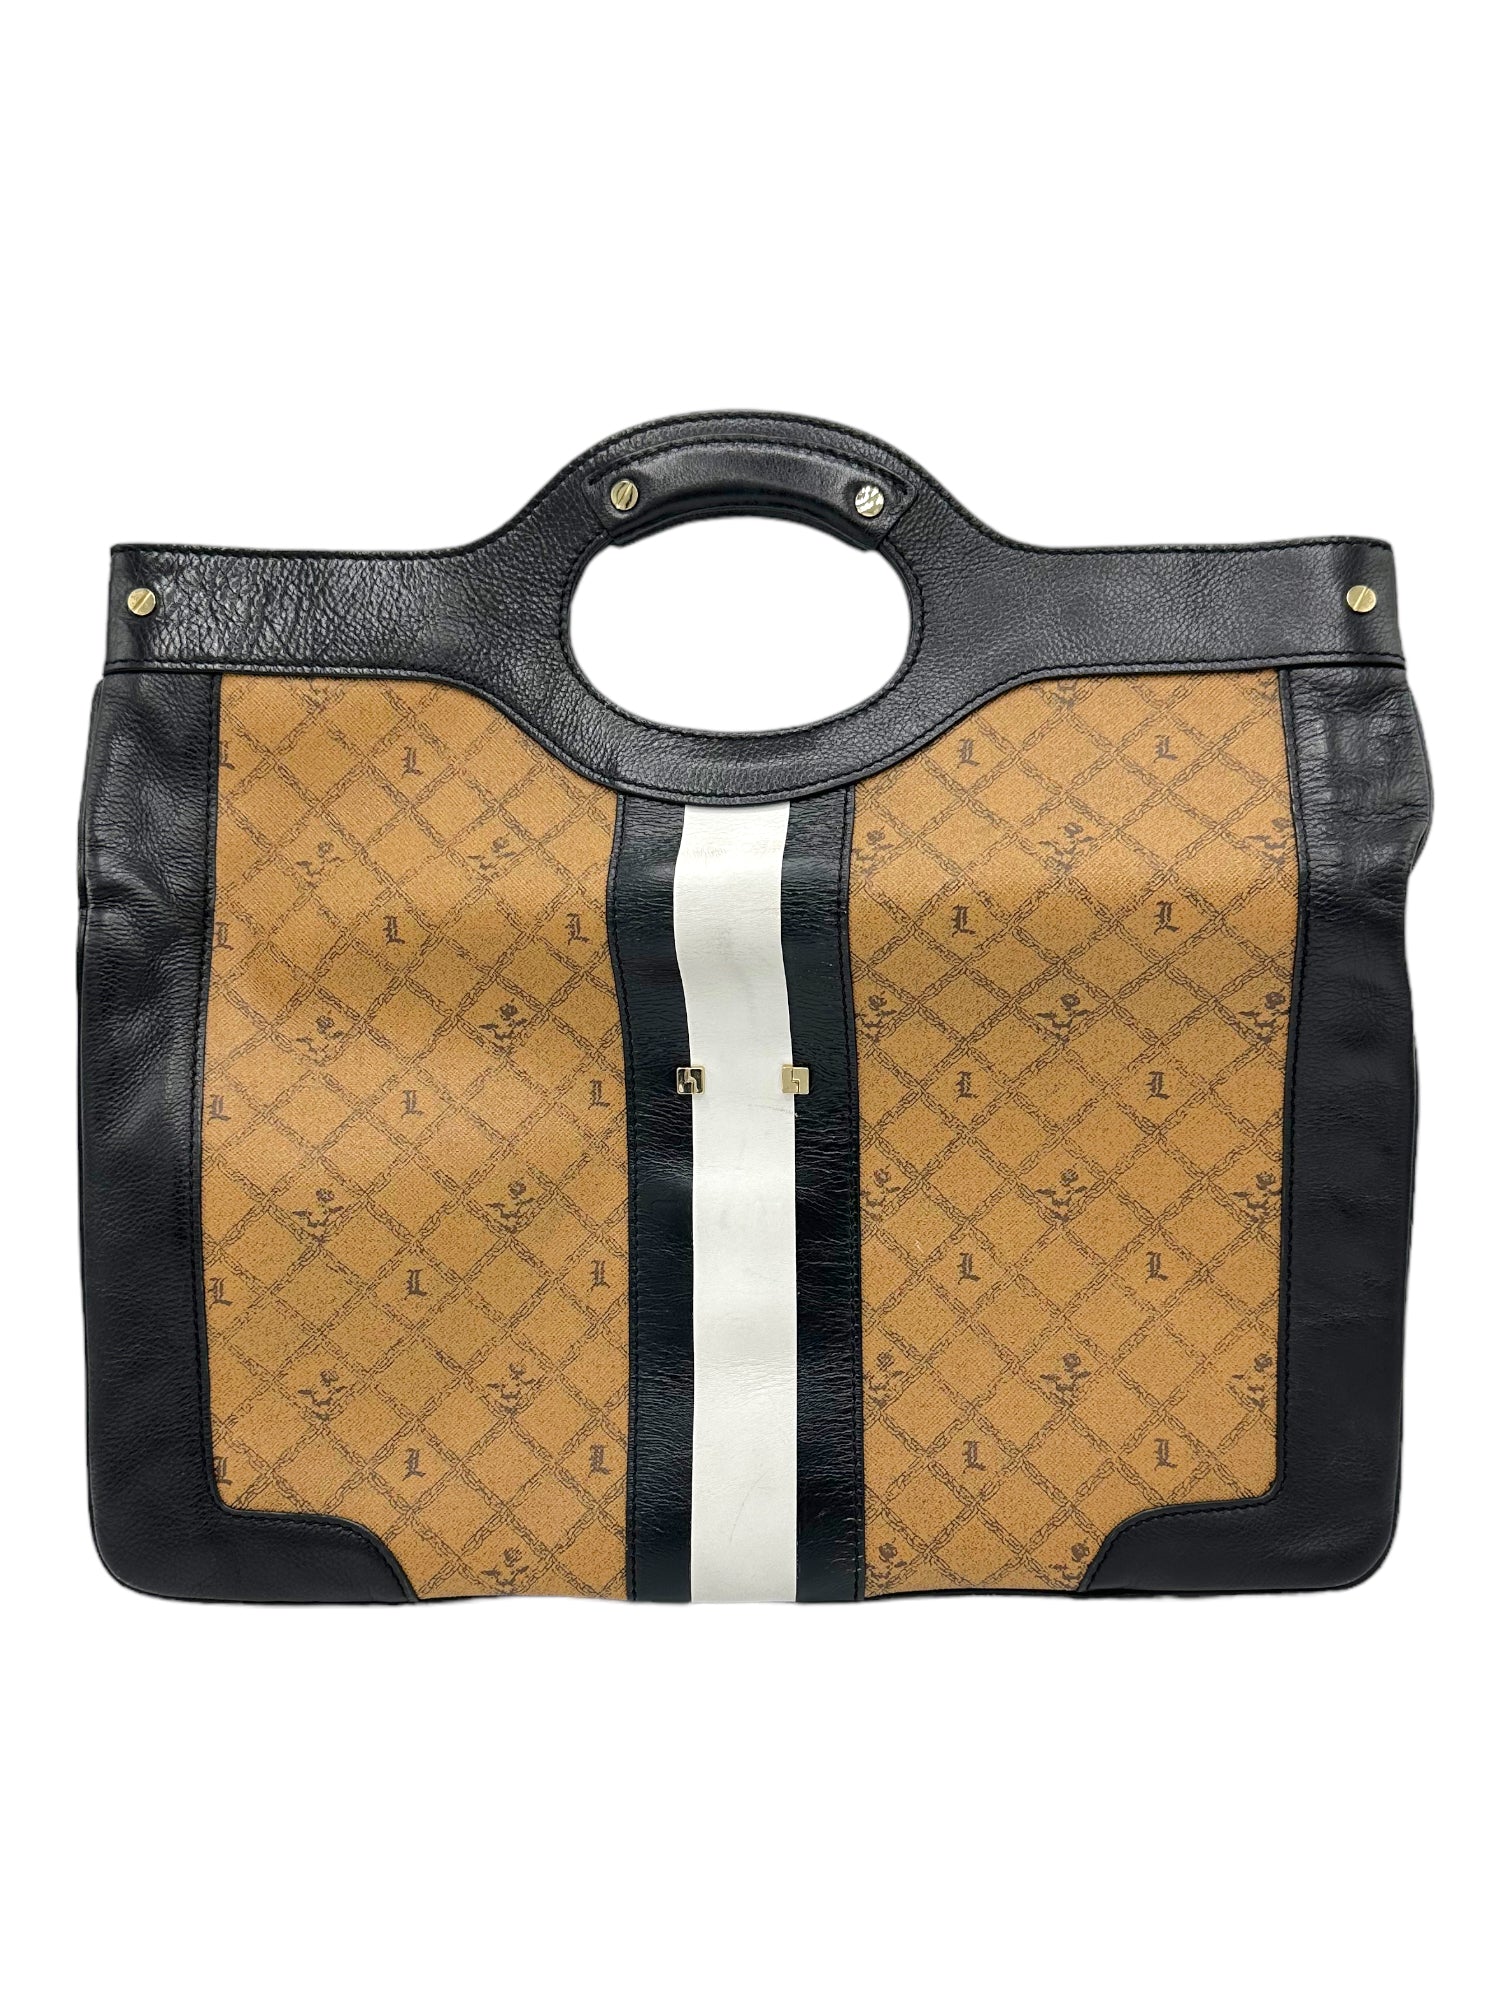 L.A.M.B. Black and Tan Convertible Clutch - Genuine Design Luxury Consignment for Men. New & Pre-Owned Clothing, Shoes, & Accessories. Calgary, Canada